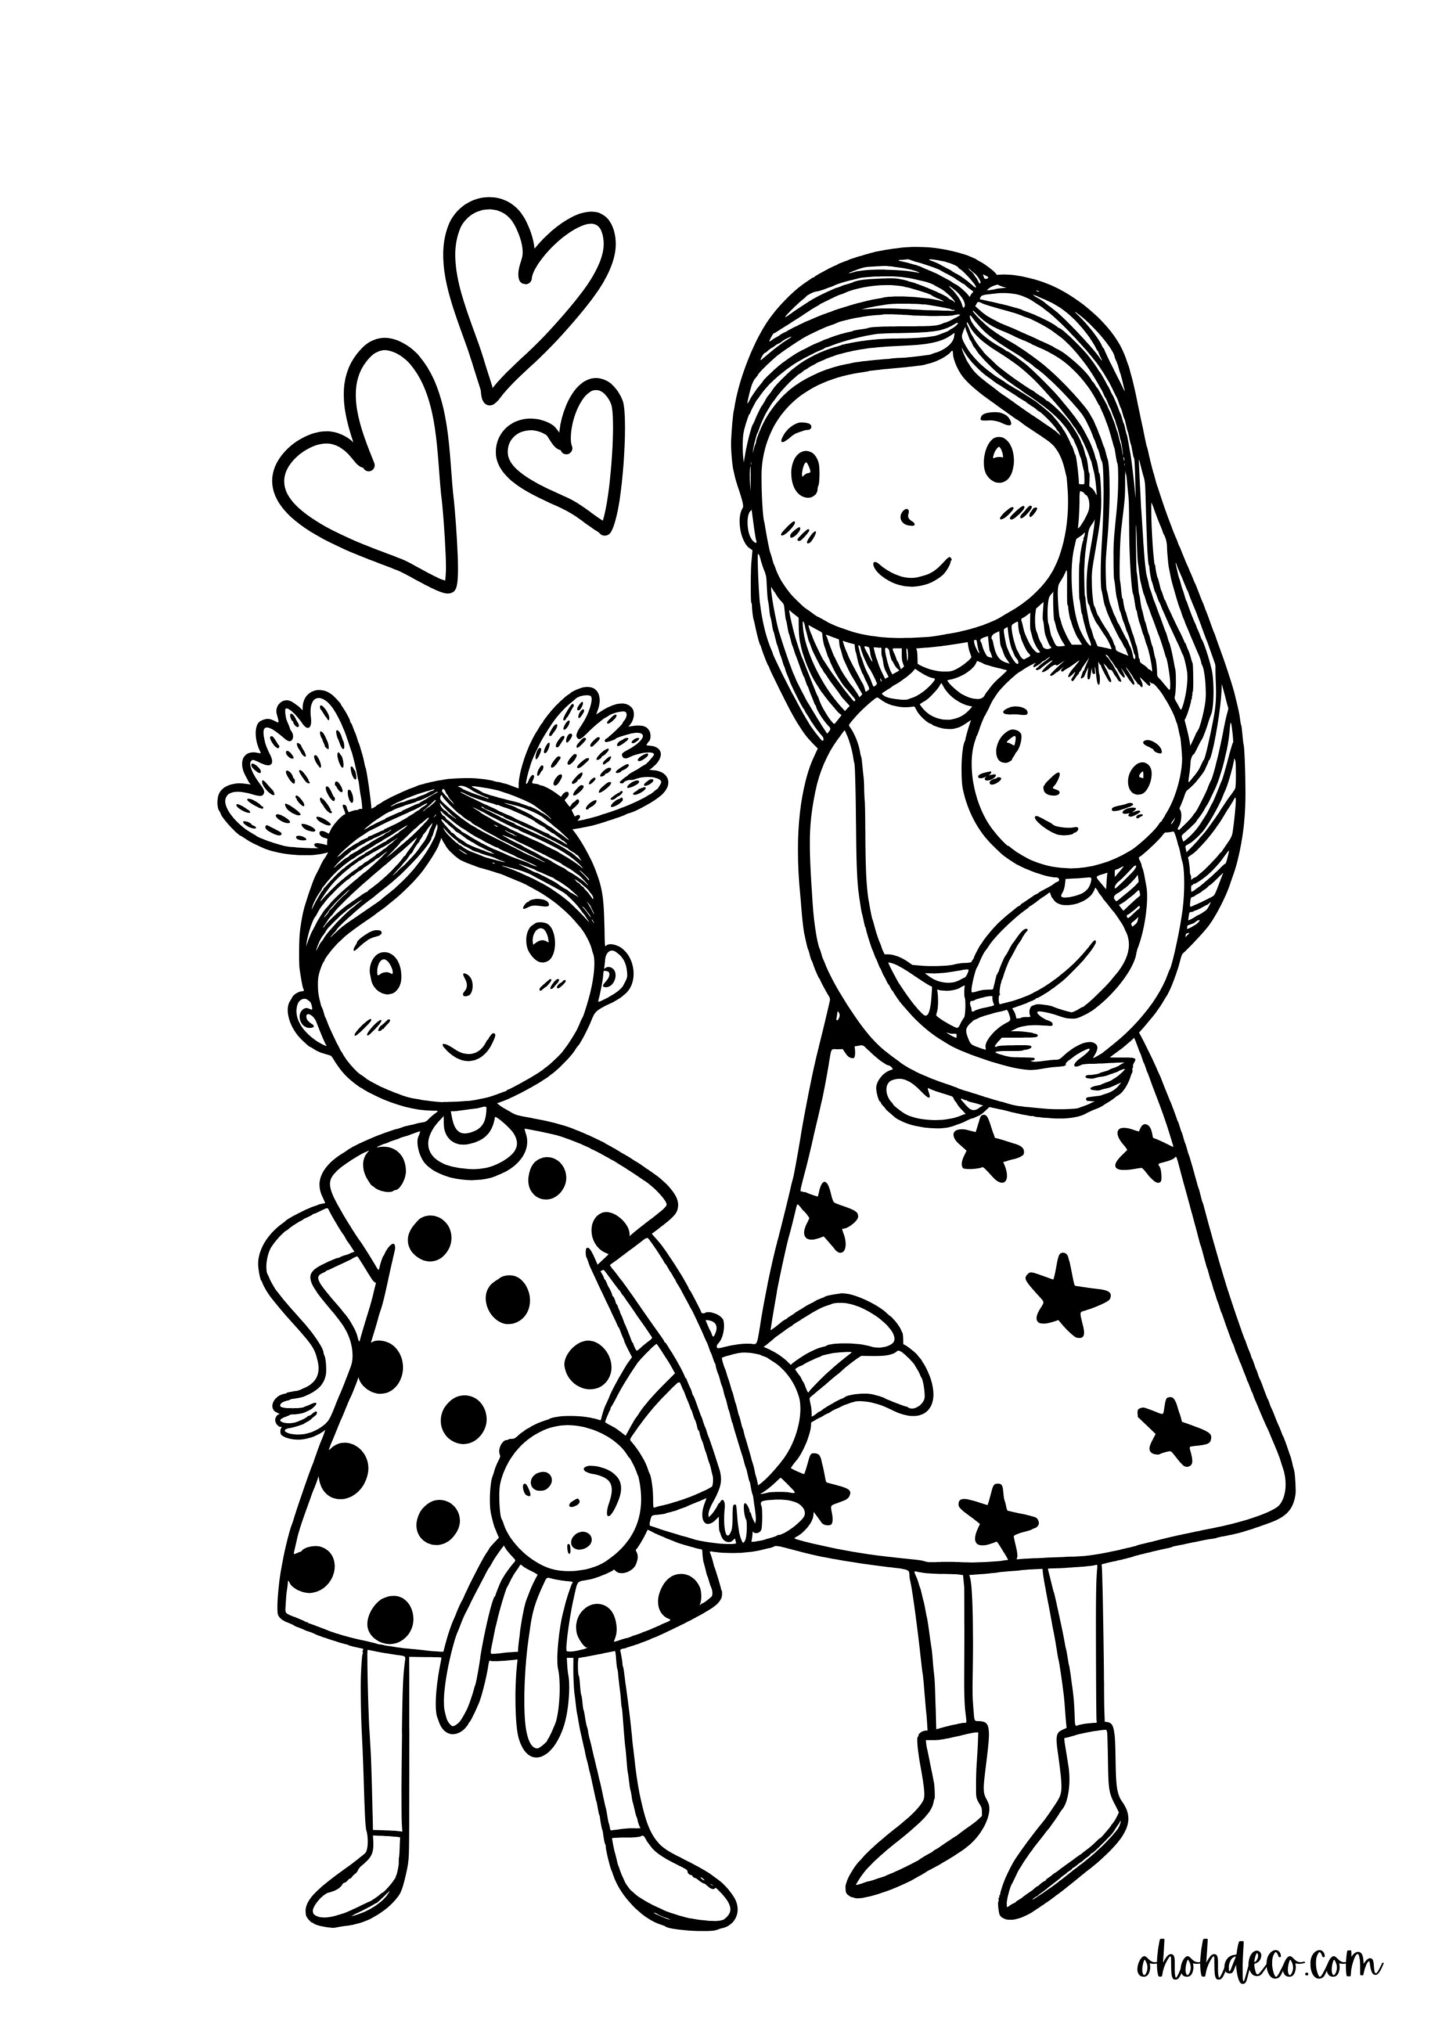 mother coloring page